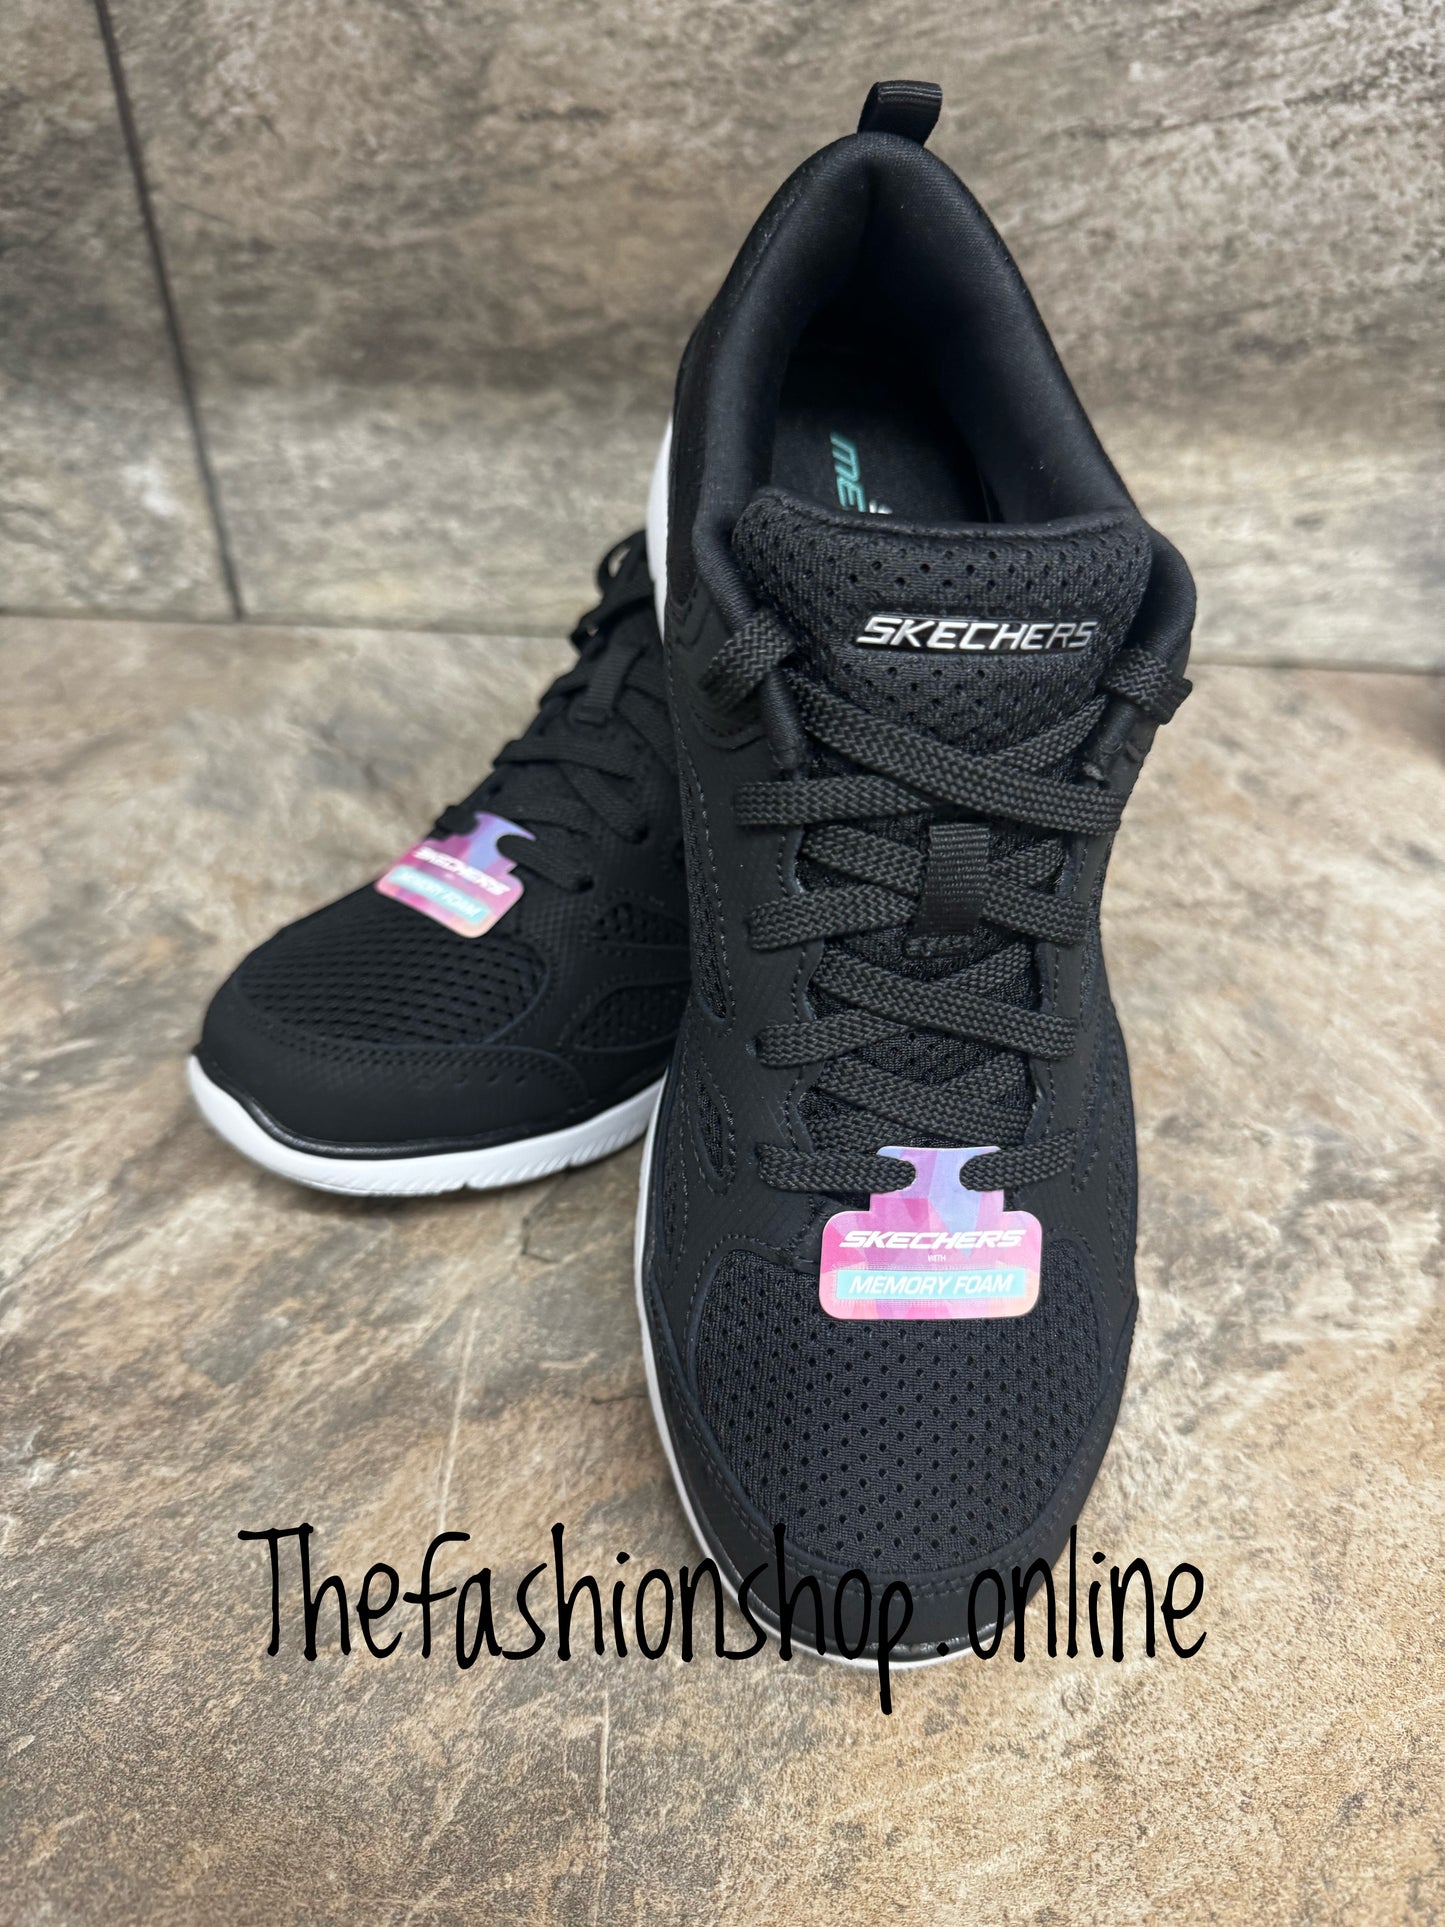 Skechers black and white Summits Suited trainers sizes 3-8